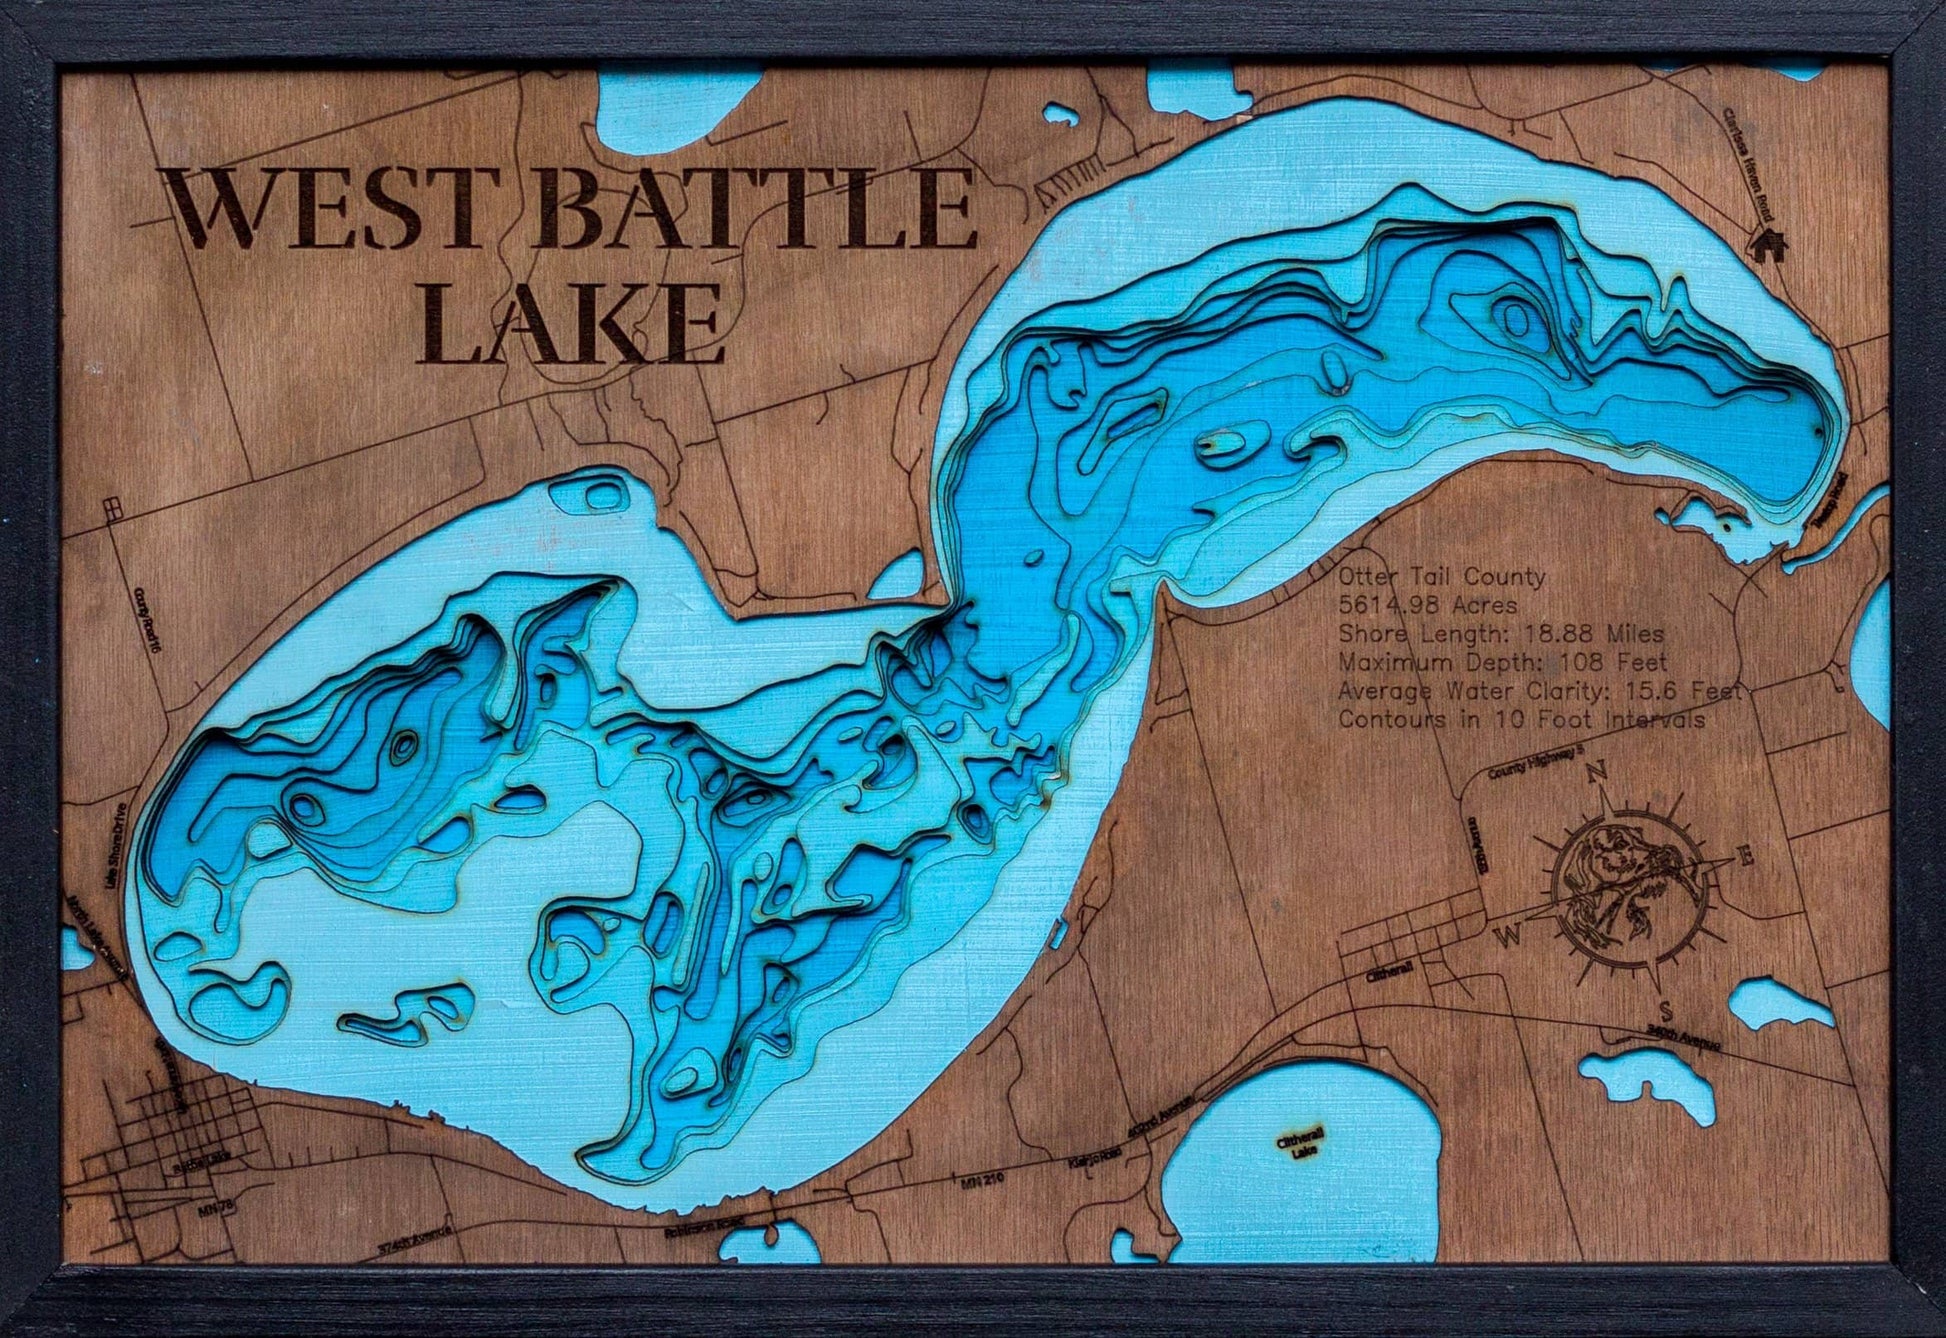 3d Depth Map of West Battle Lake in Otter Tail County, Minnesota